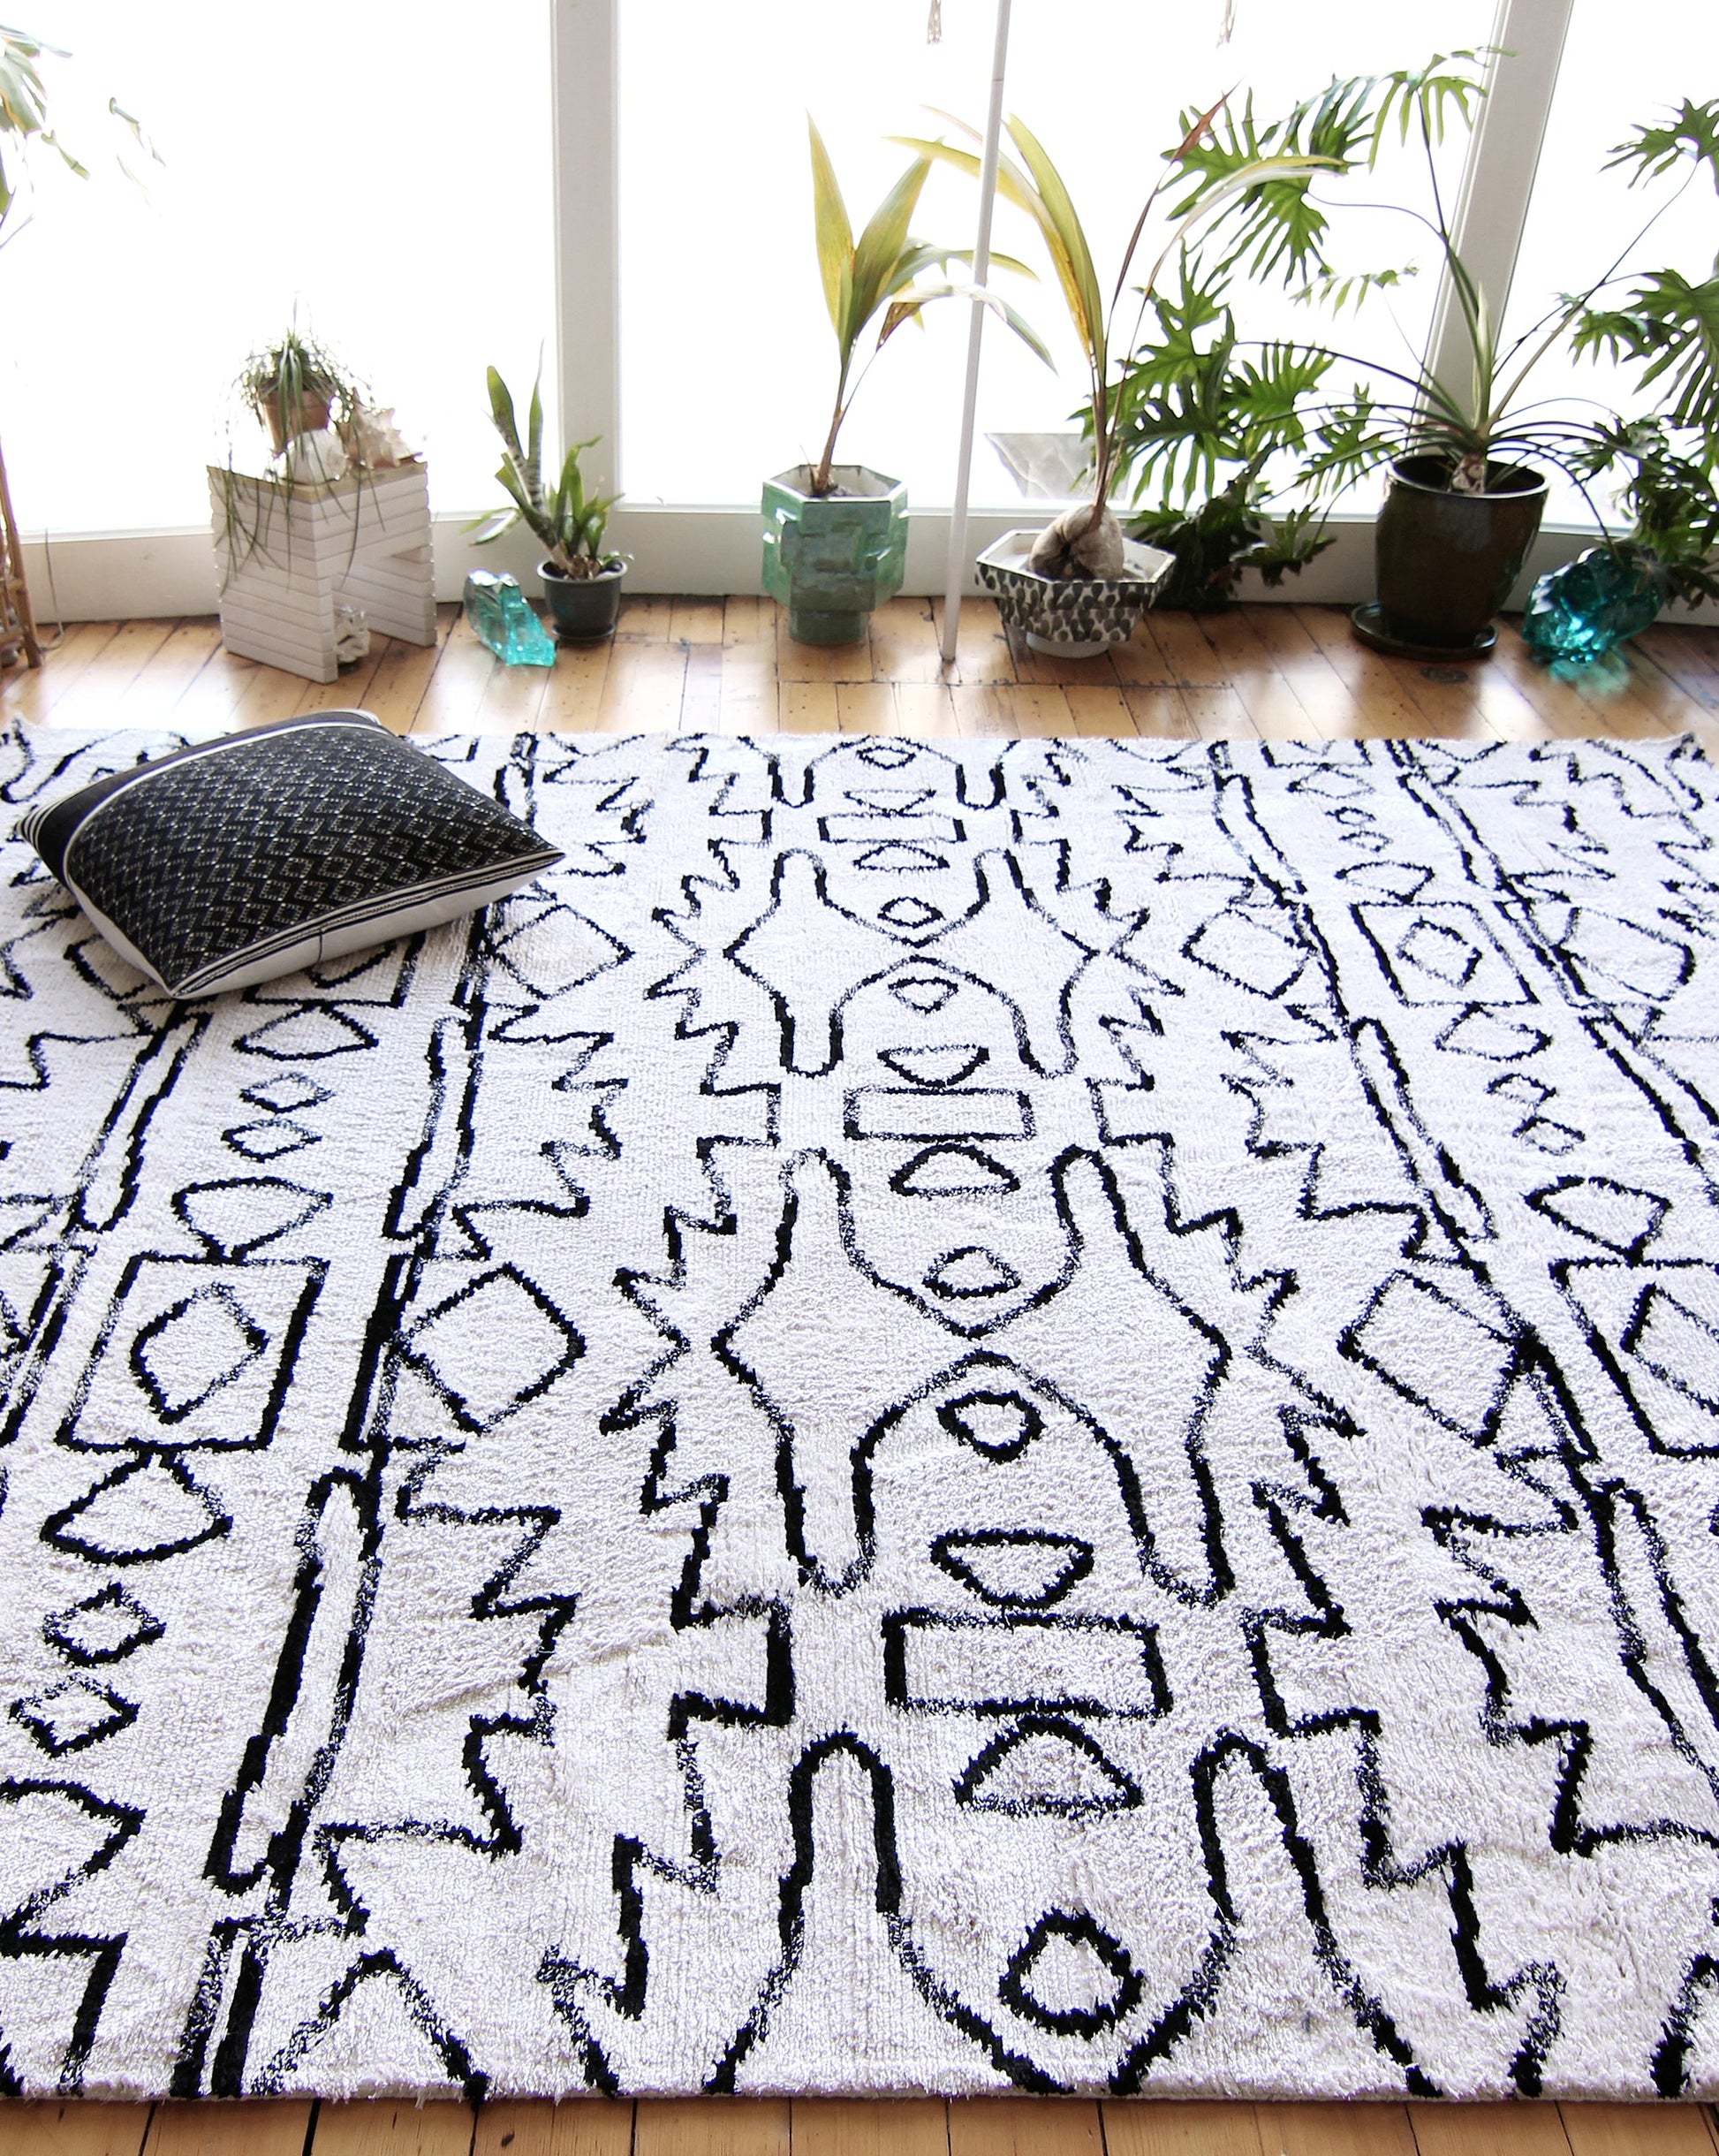 A versatile Akimbo Hand Knotted Rug||Black And White with a graphic geometric pattern, placed in a room with plants.